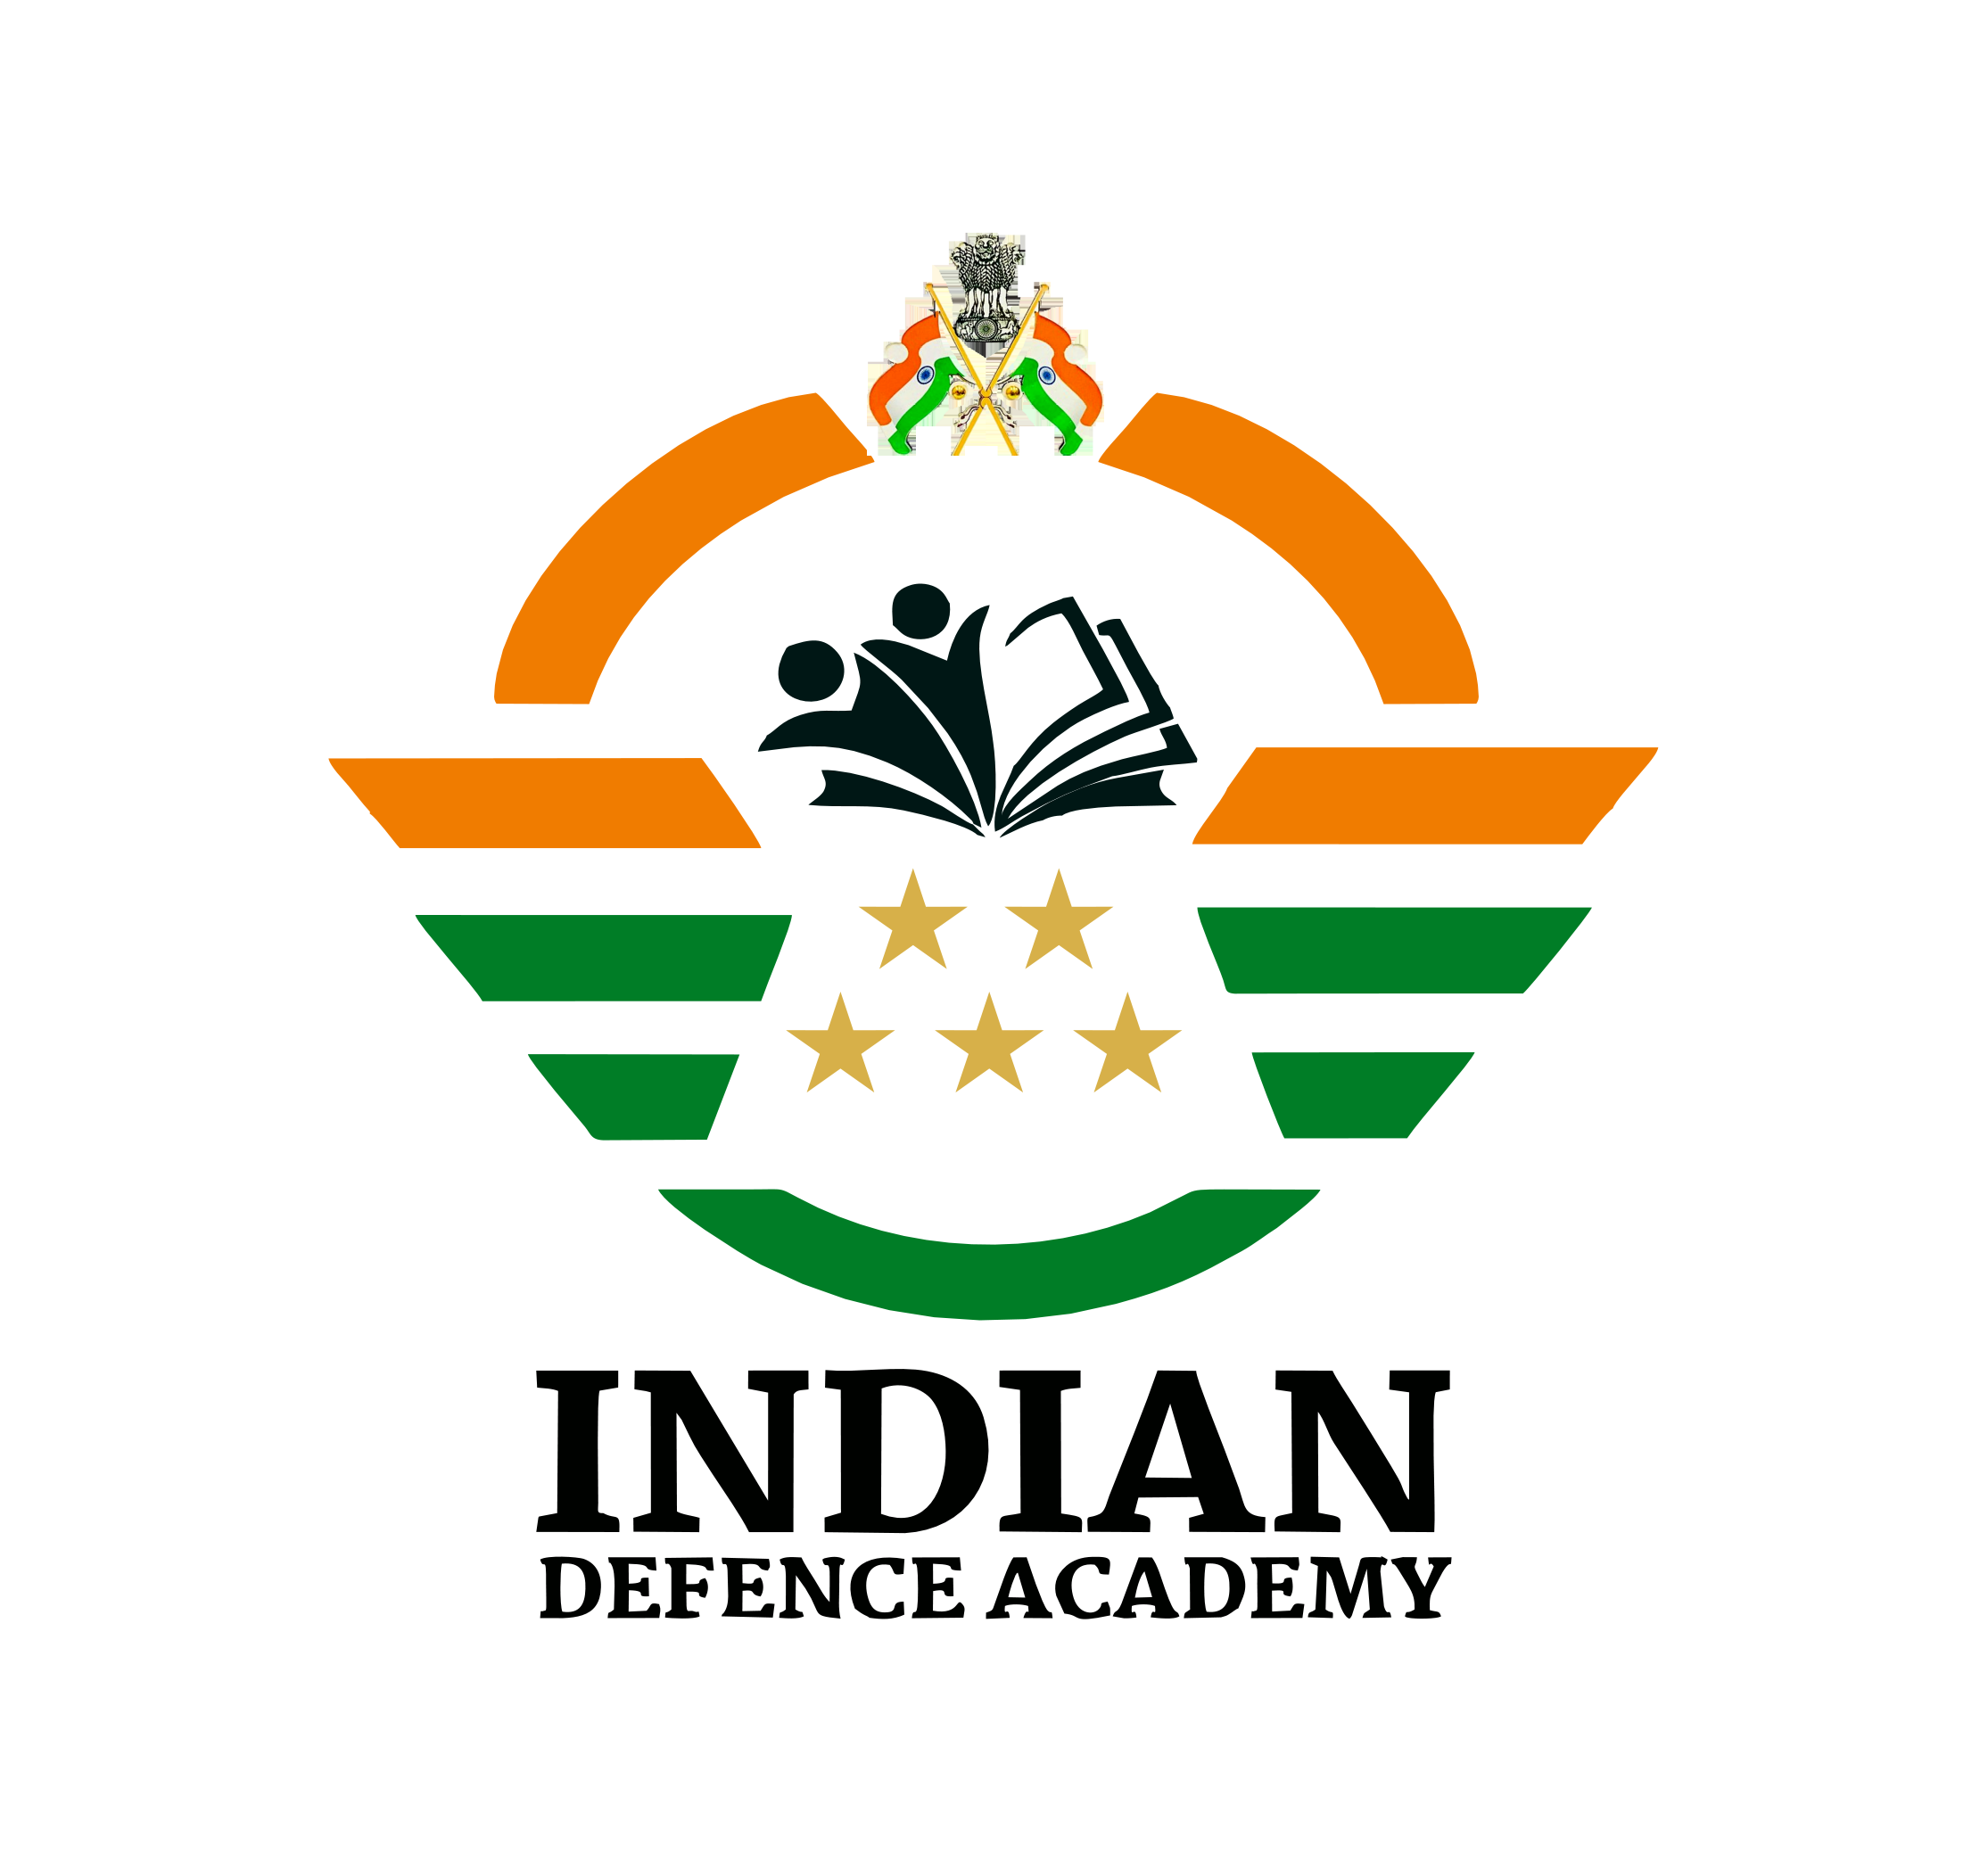 Indian Defence Academy|Colleges|Education